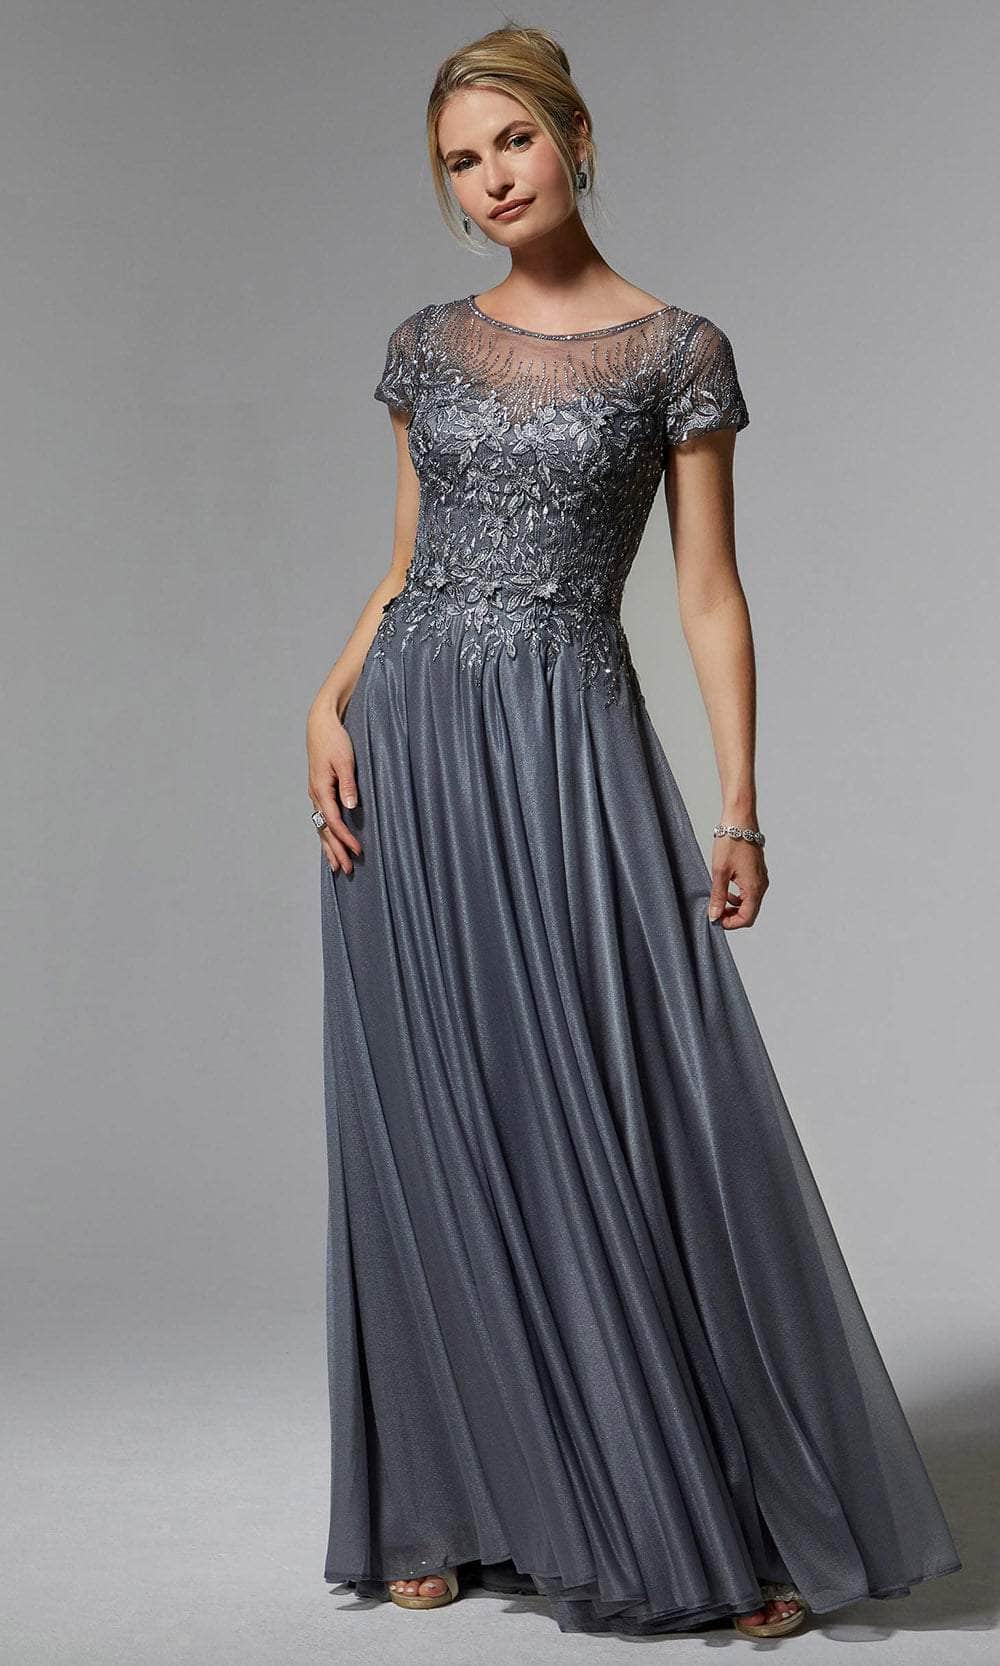 Image of MGNY By Mori Lee 72905 - Short Sleeve Embroidered Evening Dress